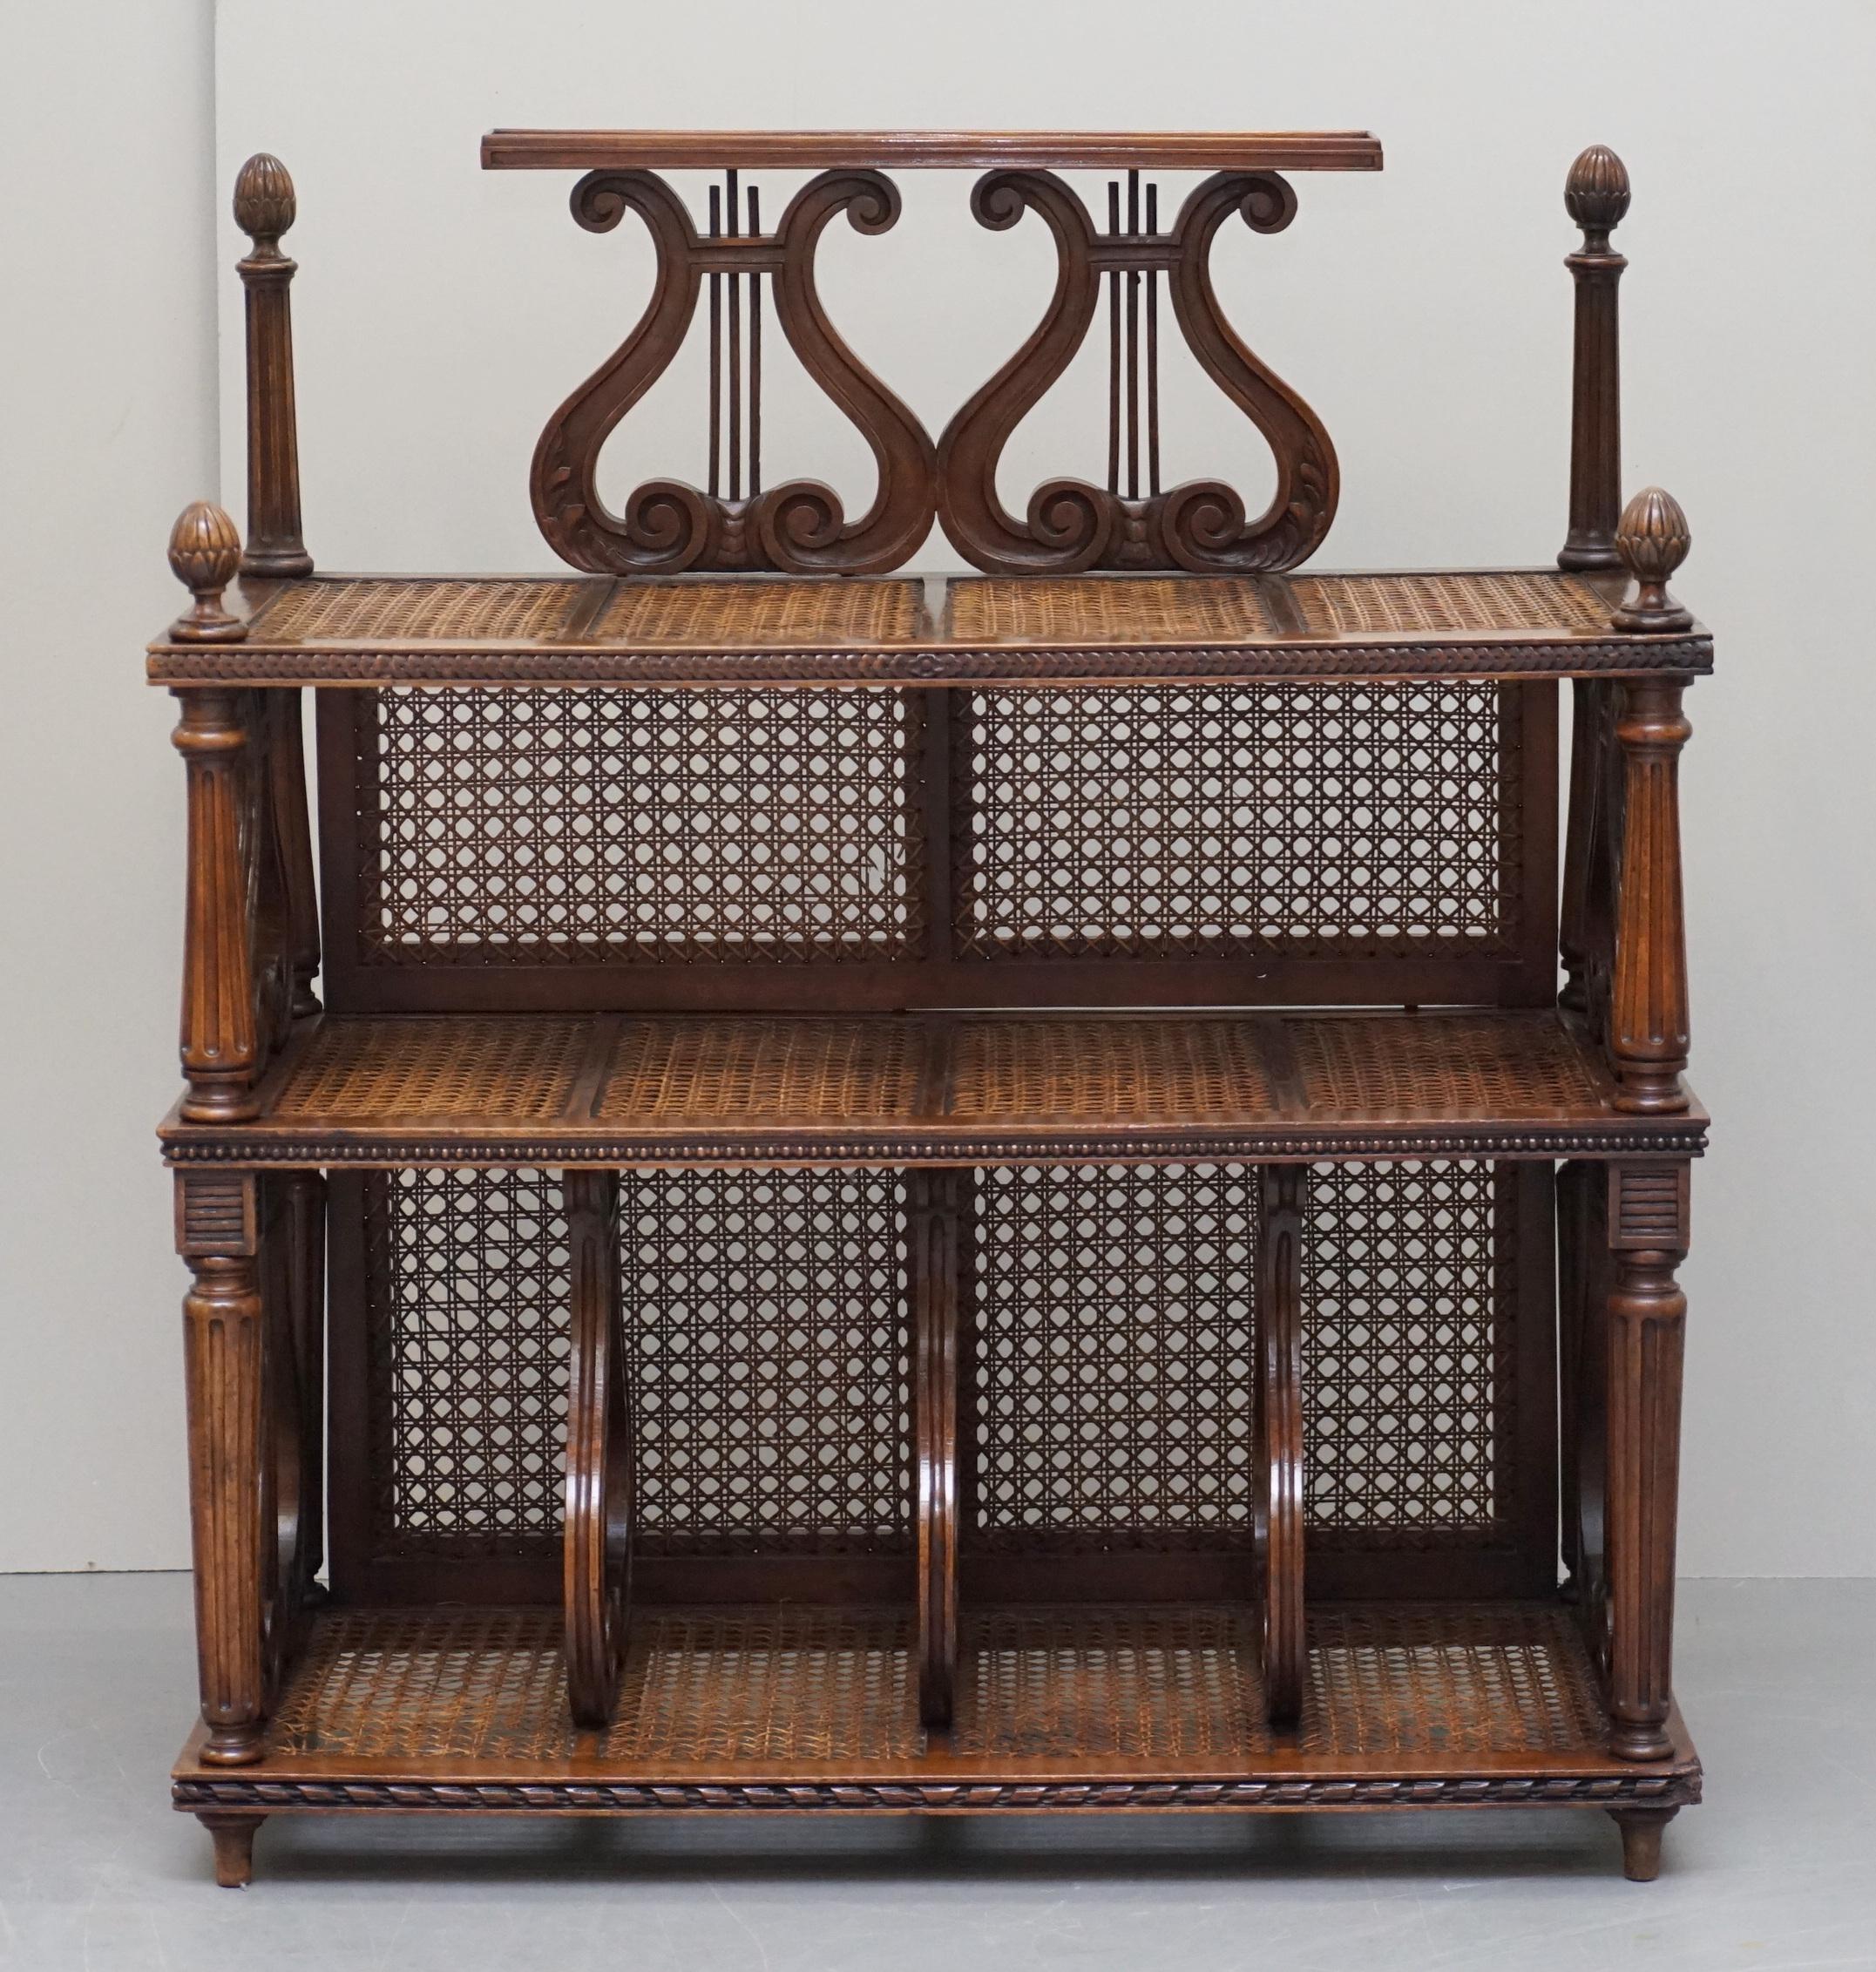 We are delighted to offer for sale this stunning original circa 1880 French walnut étagère musically inspired rattan stand or bookcase

A very unique and decorative piece of furniture. Étagère’s are similar to whatnots, you can use them for just